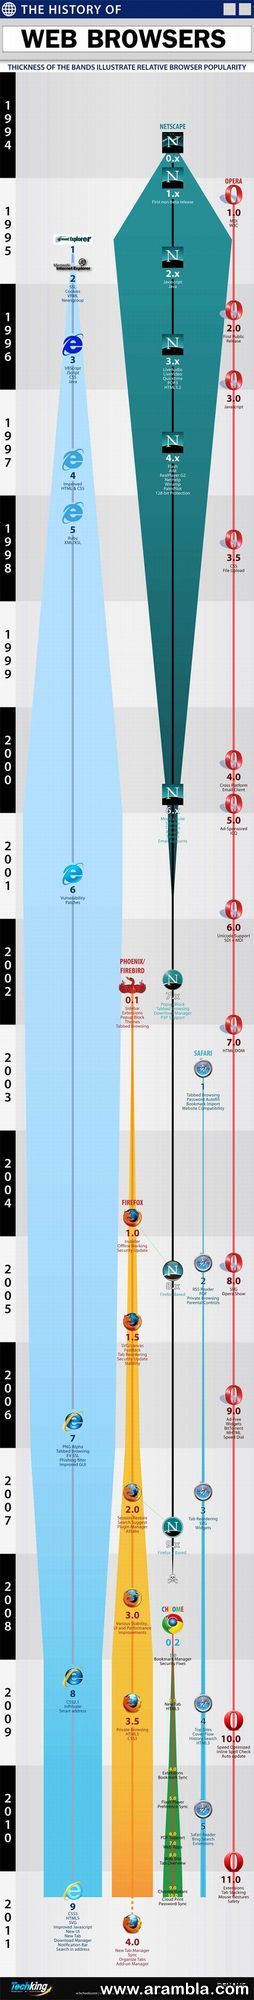 The Evolution Of Web Browsers